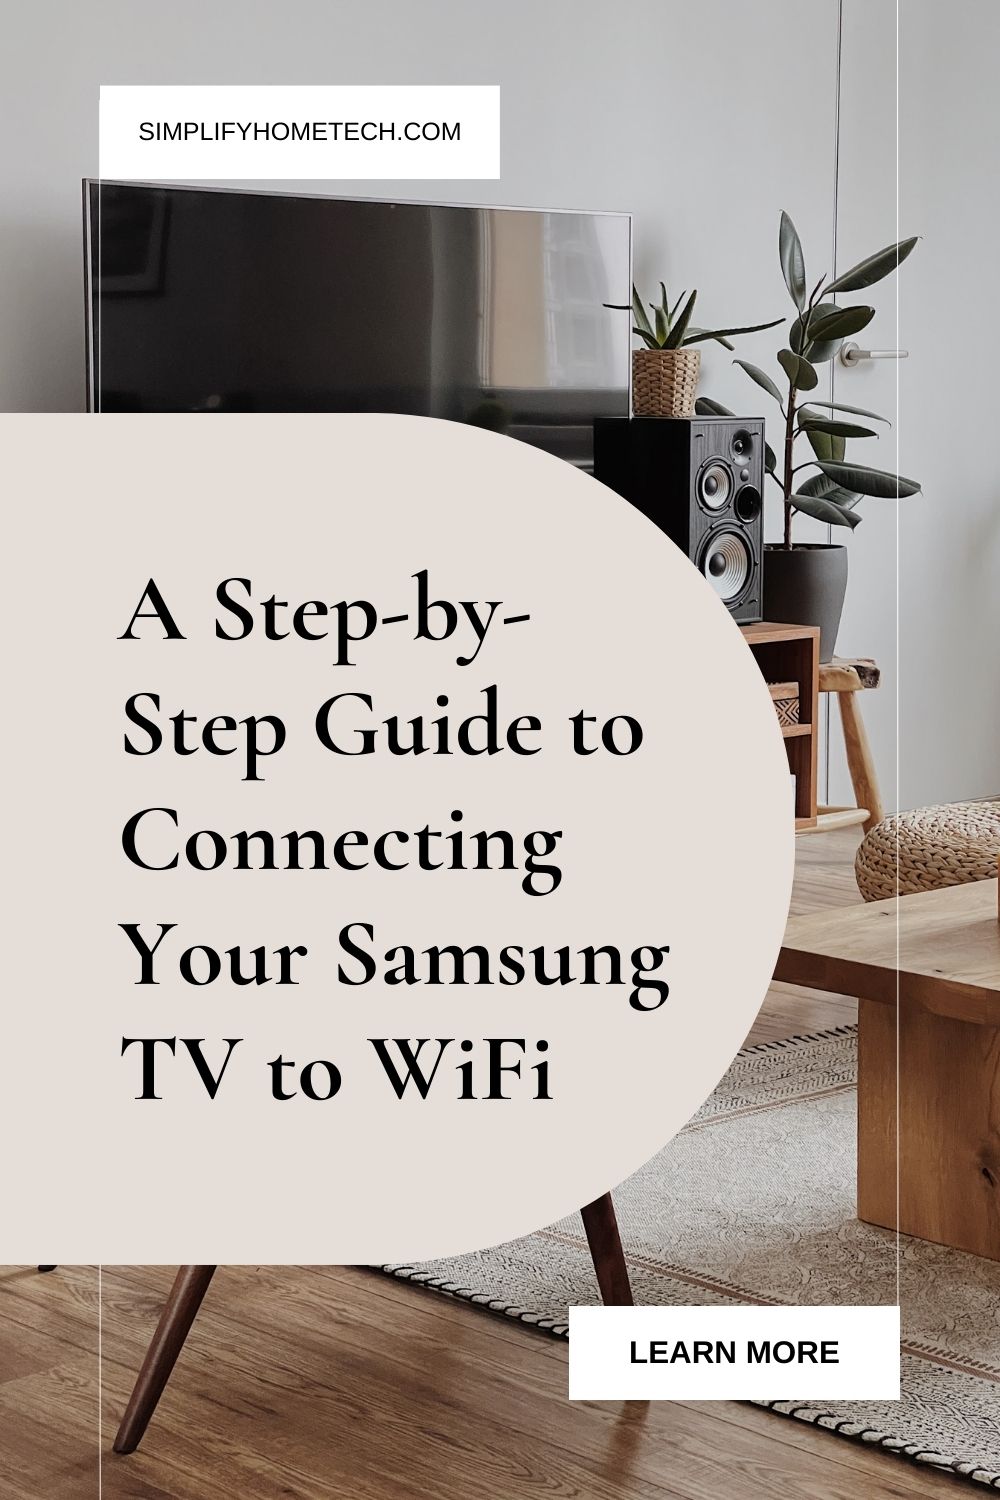 A Step-by-Step Guide to Connecting Your Samsung TV to WiFi